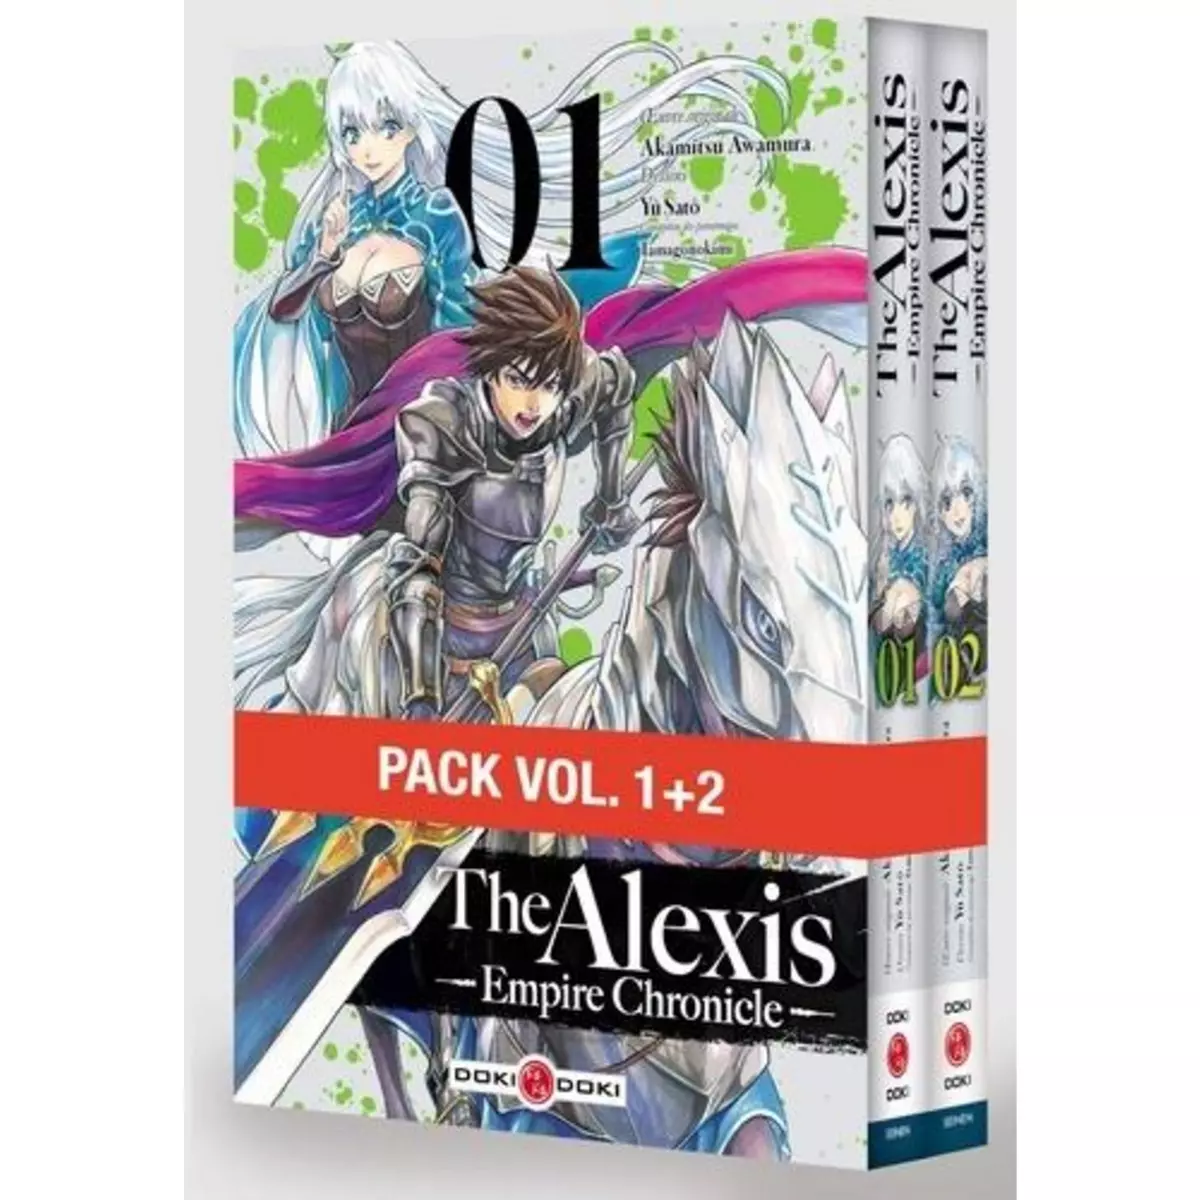  THE ALEXIS EMPIRE CHRONICLE TOME 1 ET 2 : PACK EN 2 VOLUMES. EDITION LIMITEE, Awamura Akamitsu